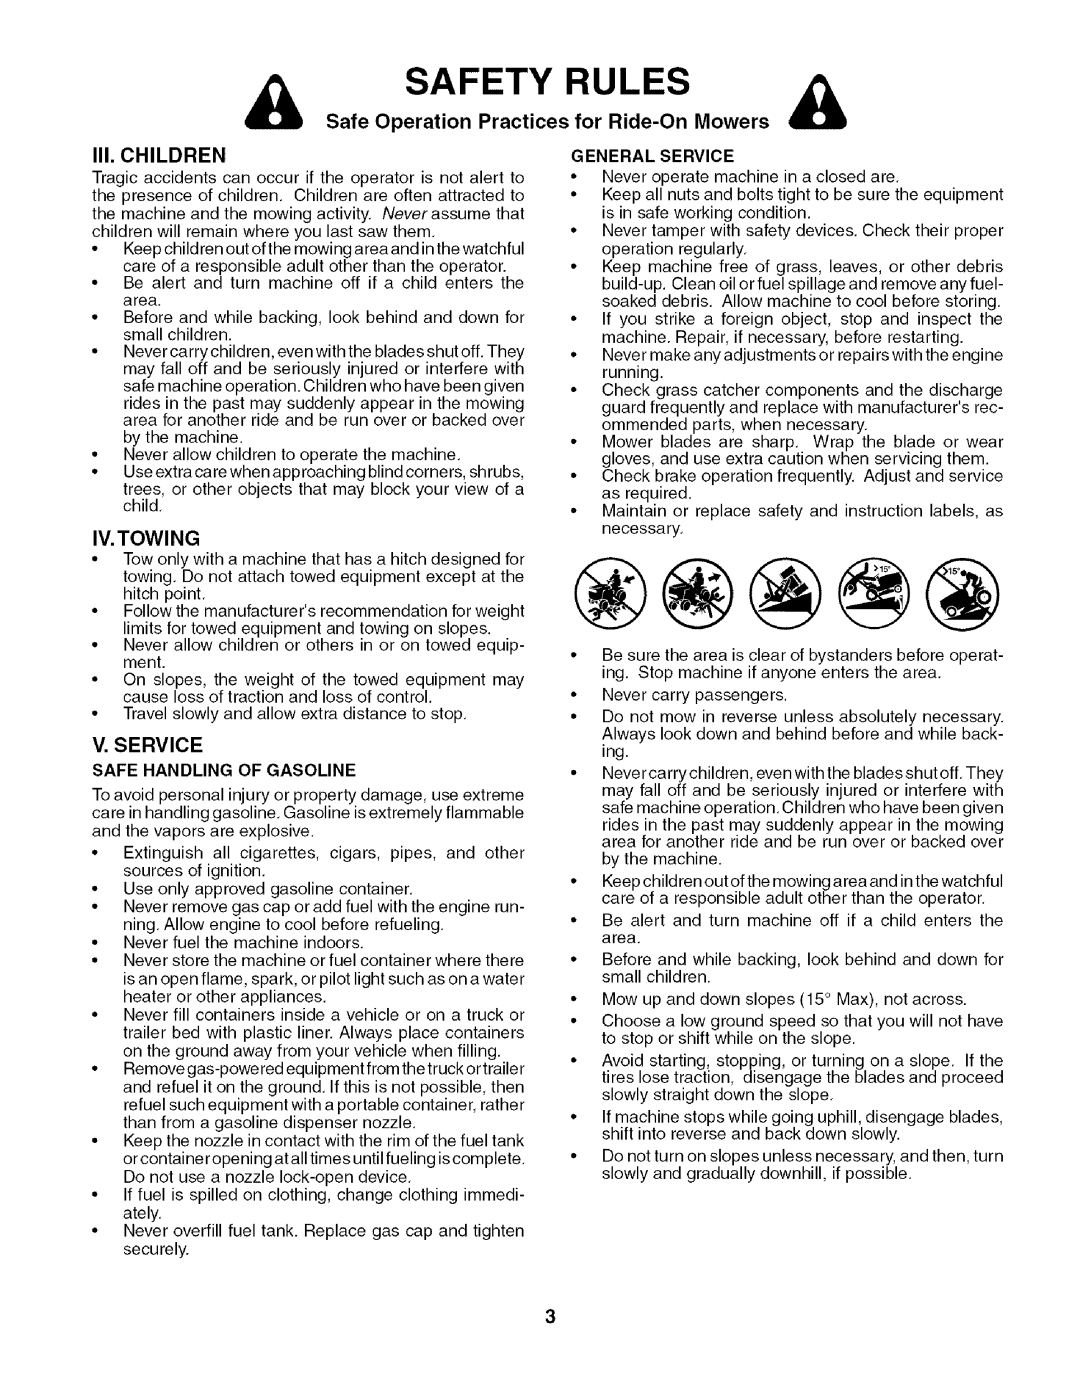 Husqvarna 917.27909 owner manual Safe Operation Practices, III. Children, IV. Towi NG, Service, For Ride-On Mowers 